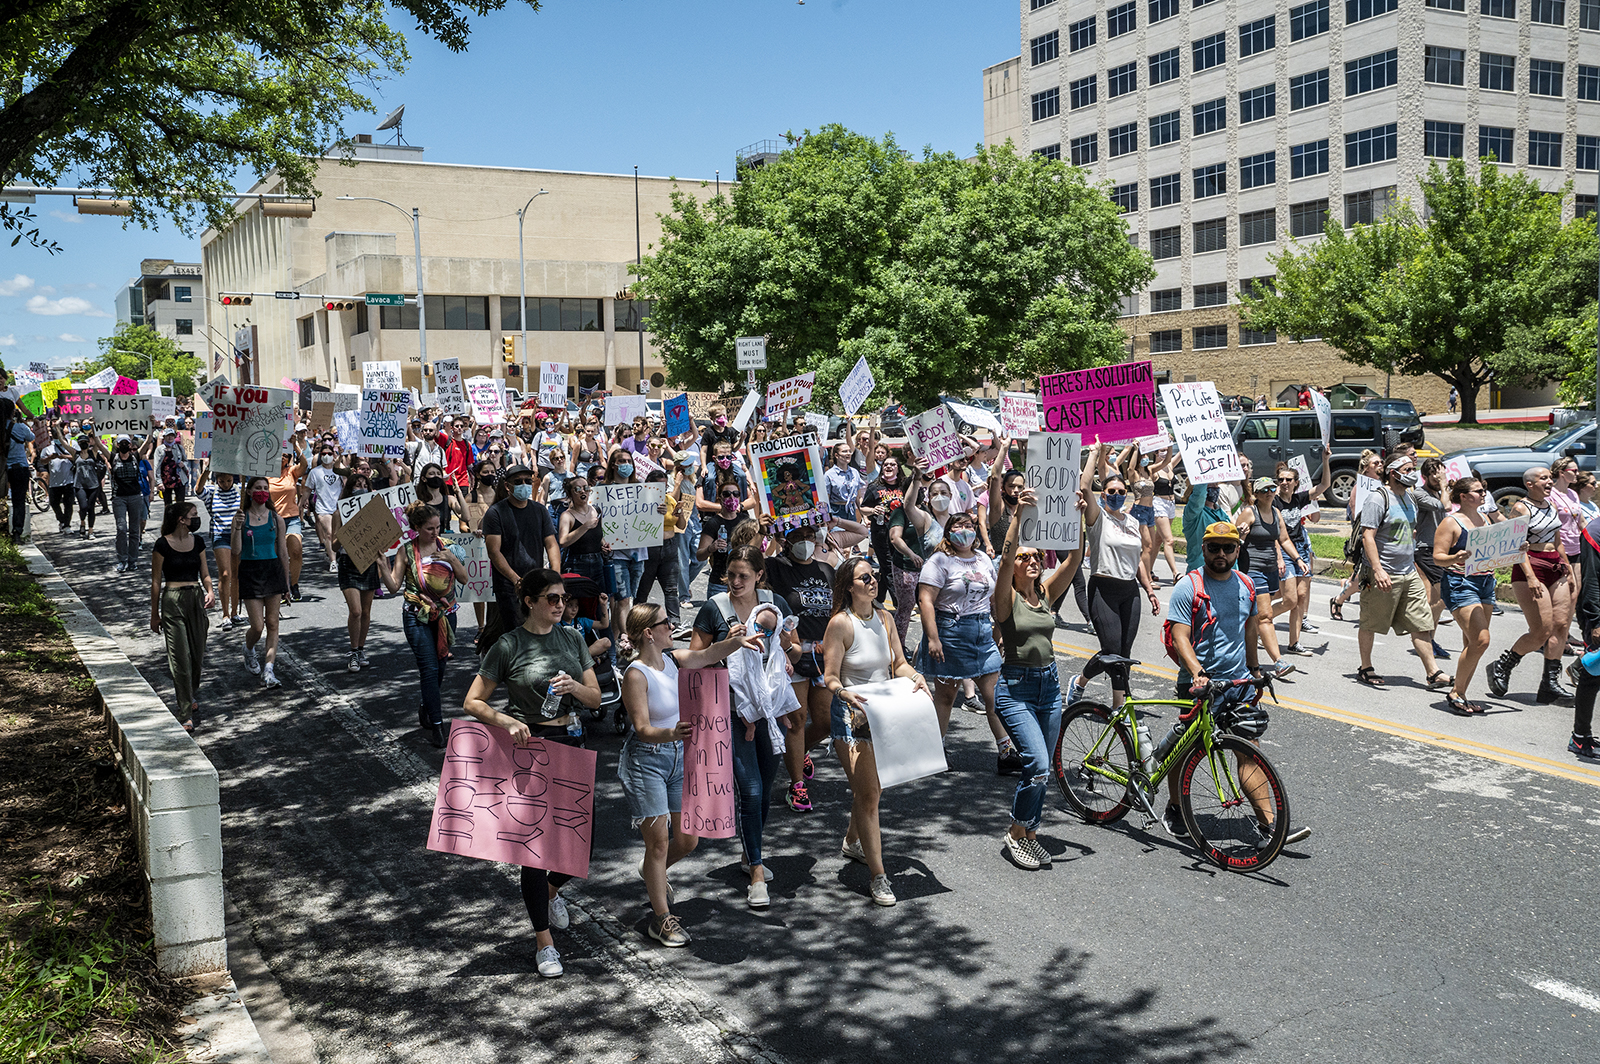 Protesters march toward the Governors mansion at a protest outside the Texas state capitol on May 29, 2021 in Austin, Texas. Thousands of protesters came out in response to a new bill outlawing abortions after a fetal heartbeat is detected signed on Wednesday by Texas Governor Greg Abbot.(Photo by Sergio Flores/Getty Images)